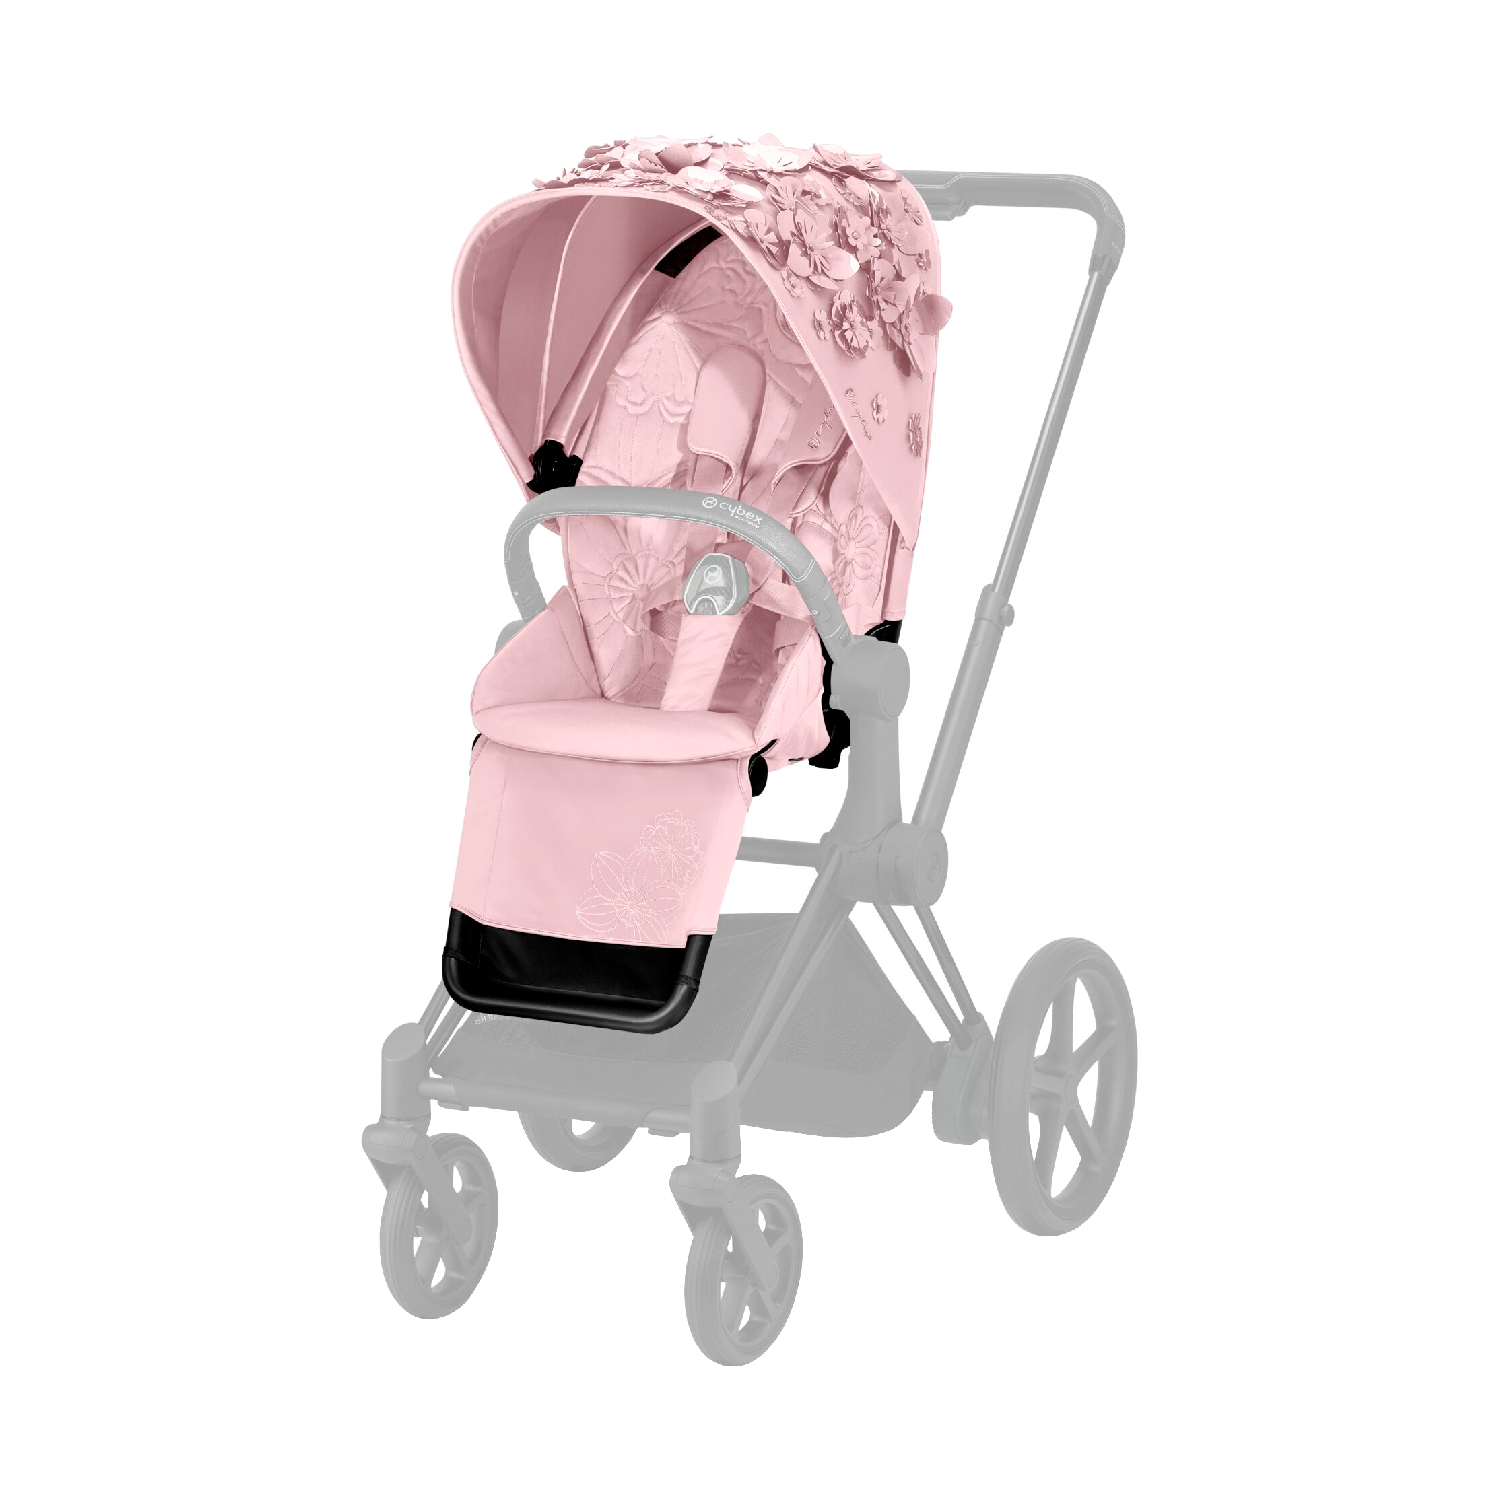 Cybex Cybex Priam 4 Simply Flowers Seat Pack Pink